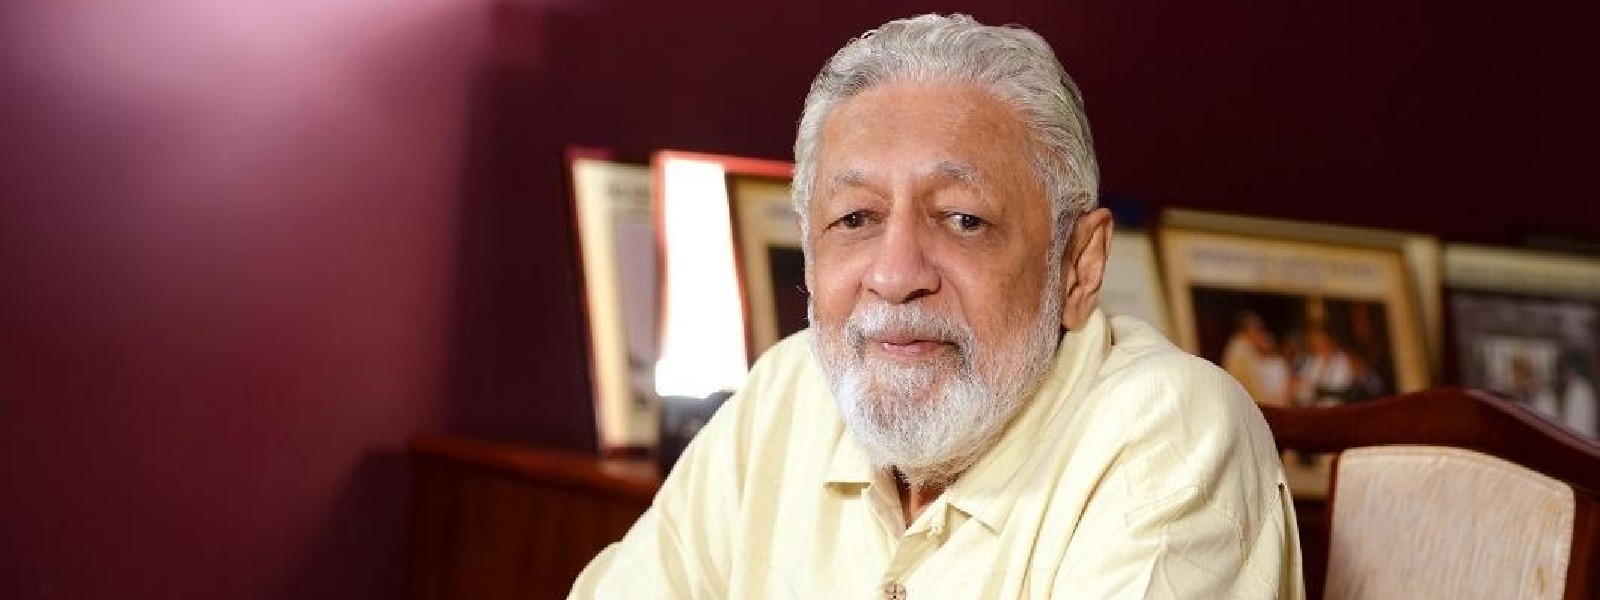 Ceylon Biscuits founder Mineka Wickramasinghe has passed away